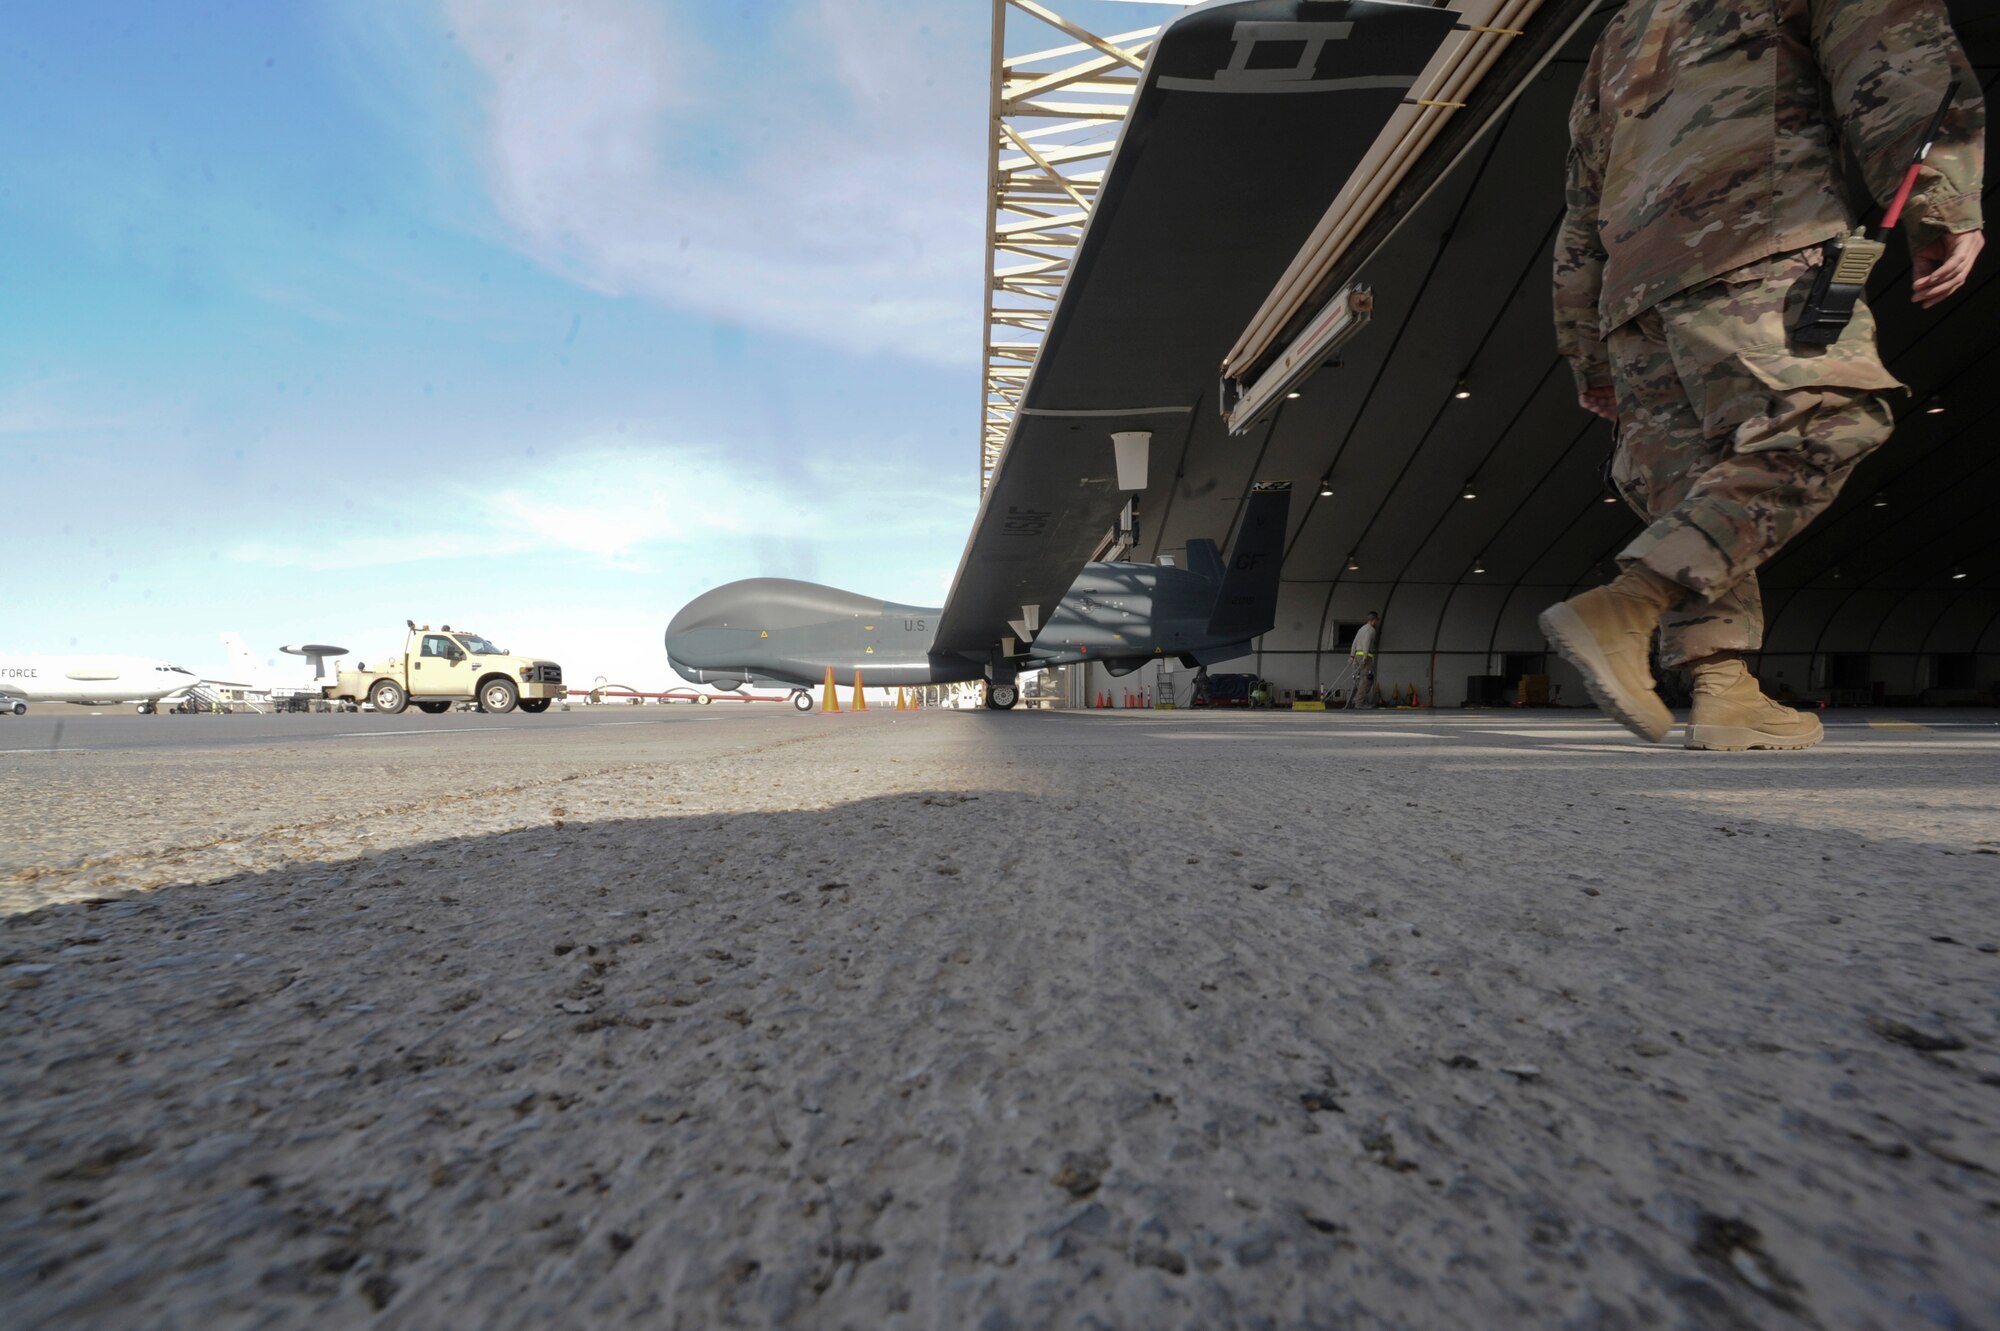 An Airman from the 99th Expeditionary Reconnaissance Squadron tows an U.S. Air Force RQ-4 Global Hawk into a hanger on Al Dhafra Air Base, United Arab Emirates Feb. 13, 2018. The Global Hawk's mission is to provide a broad spectrum of ISR collection capability to support joint combatant forces in worldwide peacetime, contingency and wartime operations. (U.S. Air Force photo by Airman 1st Class D. Blake Browning)